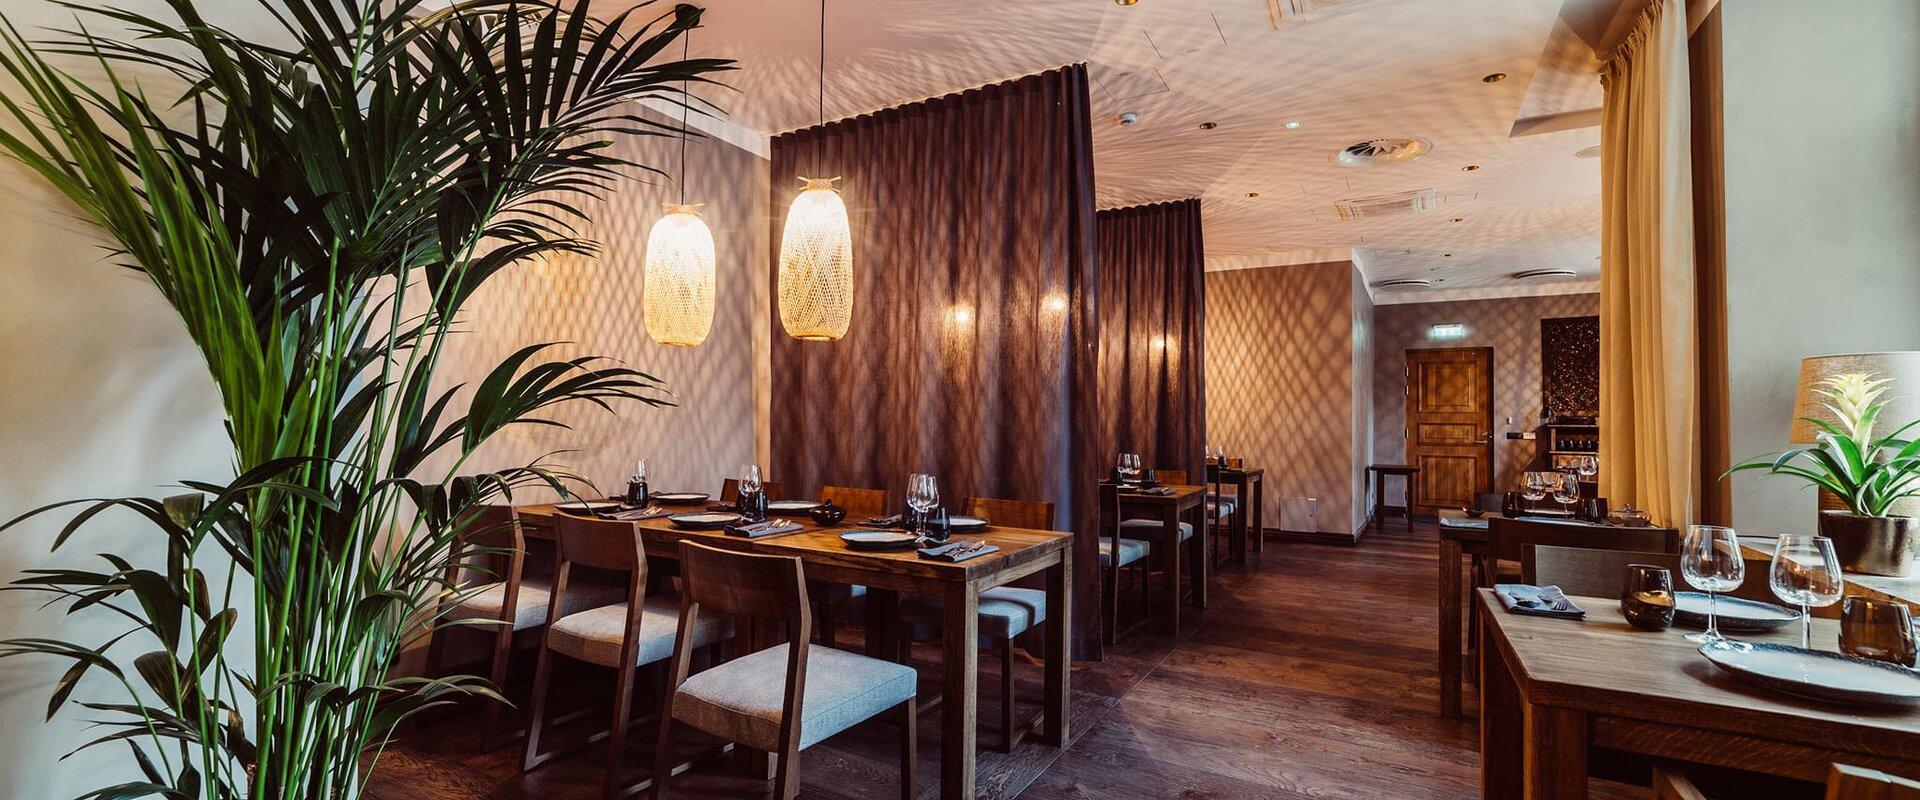 Restaurant NOK NOK brings the genuine flavours of the Kingdom of Thailand directly to the Old Town of Tallinn. The whole restaurant team is responsibl